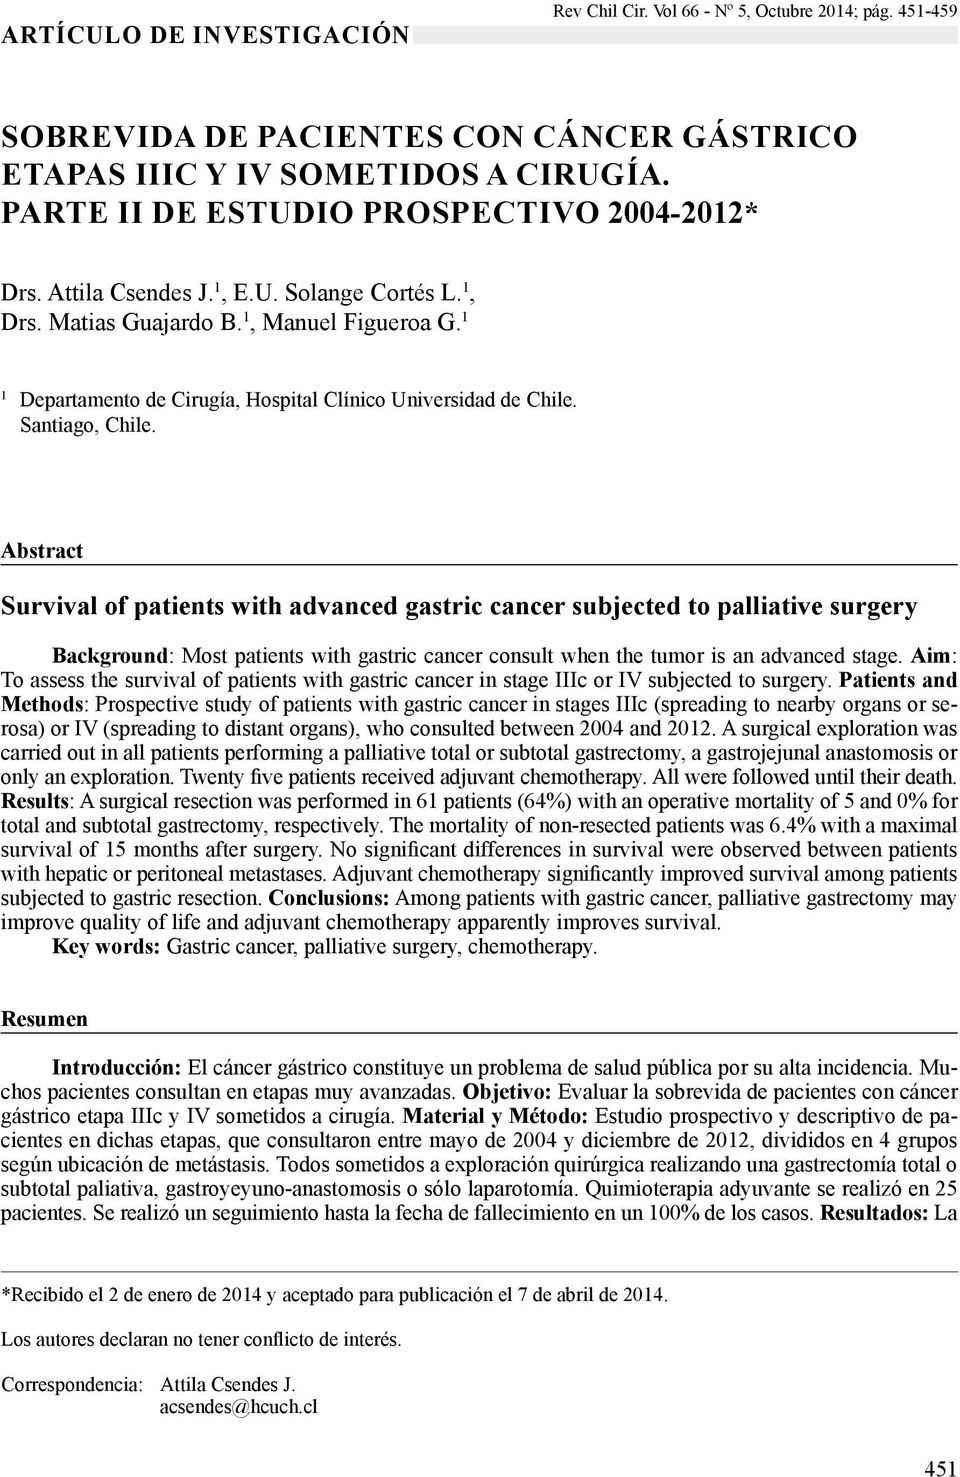 Abstract Survival of patients with advanced gastric cancer subjected to palliative surgery Background: Most patients with gastric cancer consult when the tumor is an advanced stage.